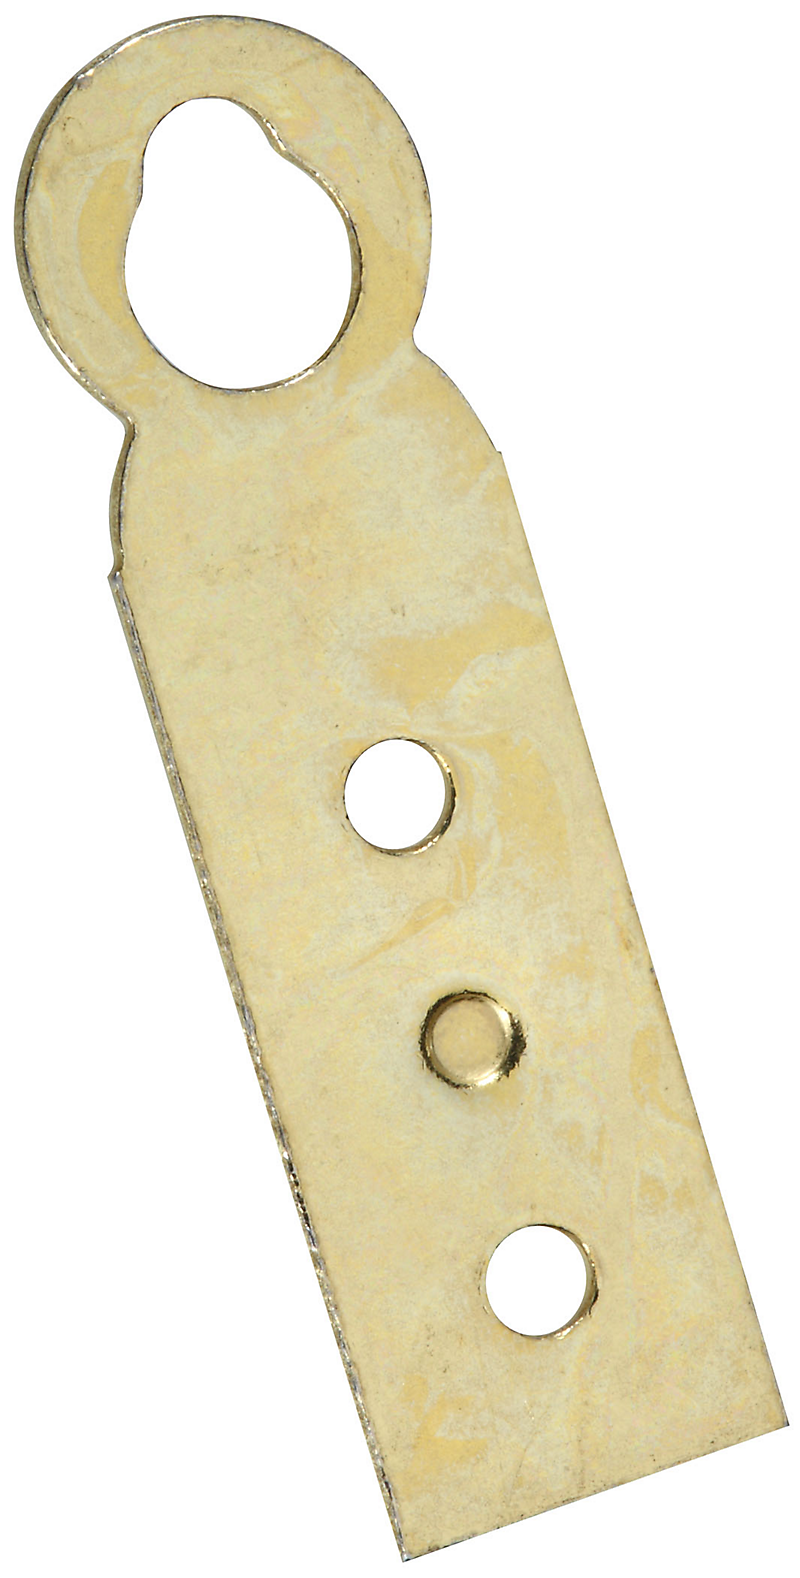 Primary Product Image for Hanger Plates